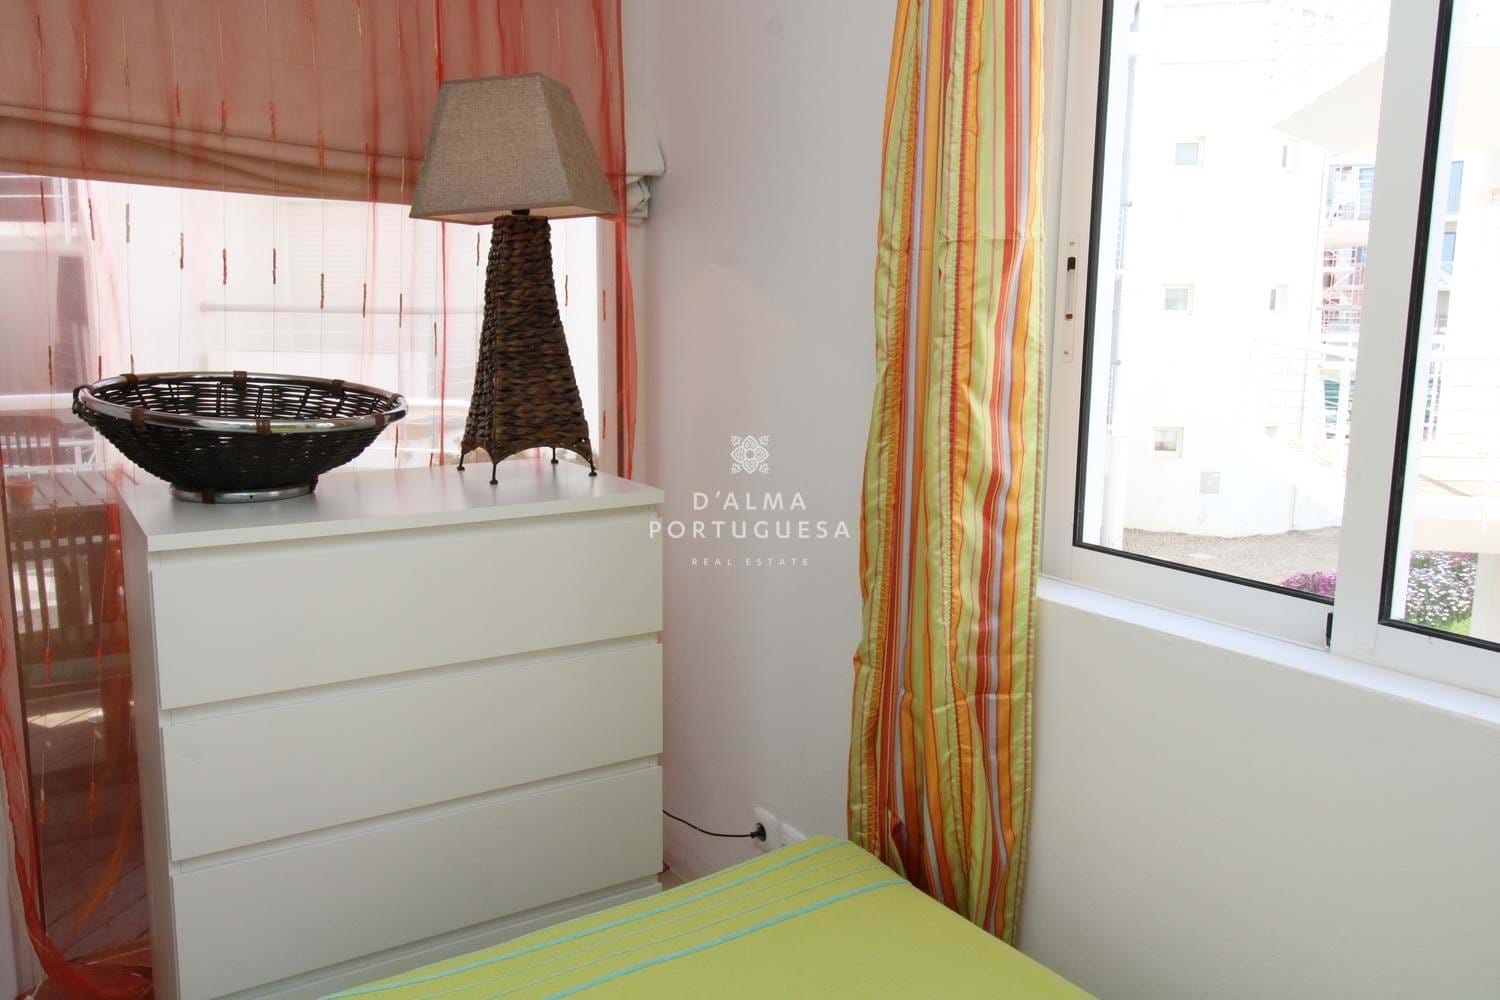 for sale apartment golden club huts,for sale apartment 3 bedroom cabanas,for sale apartment ria formosa,for sale apartment 3 bedroomria formosa cabanas 